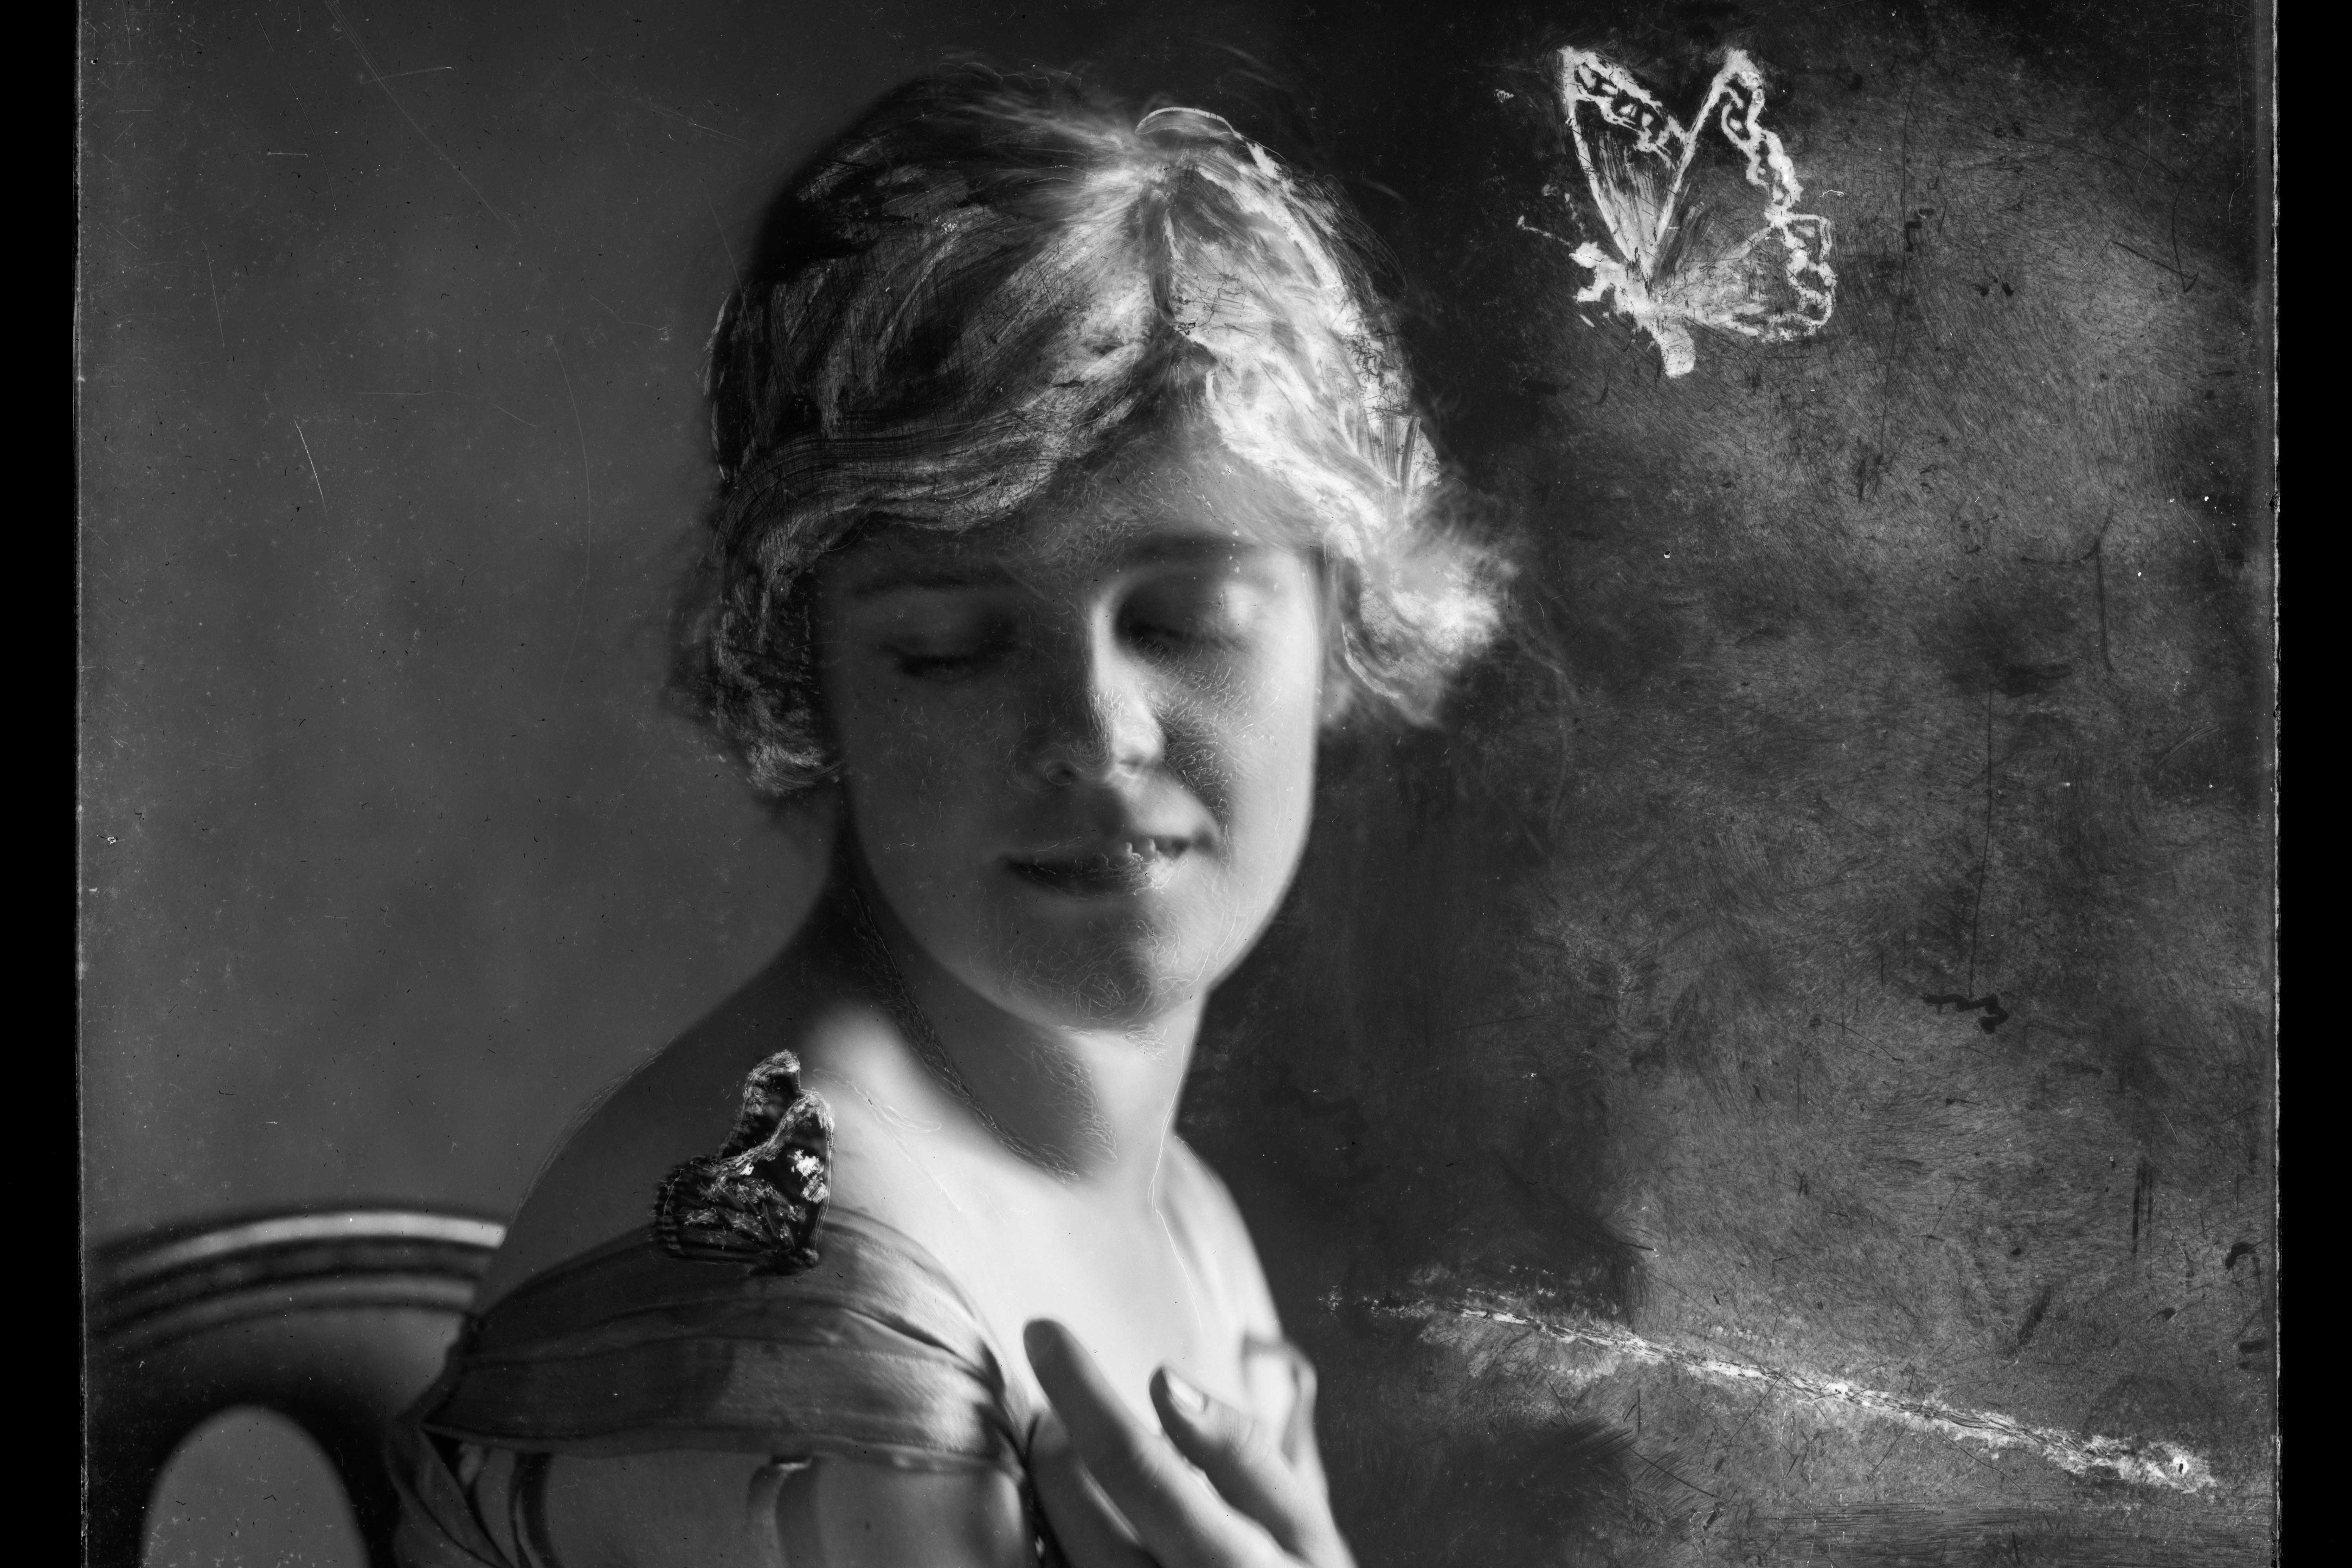 Nancy Ford Cones, Unknown Sitter with Butterfly, about 1920, Positive digital image taken from a glass plate negative with drawing, Collection of W. Roger and Patricia K. Fry.